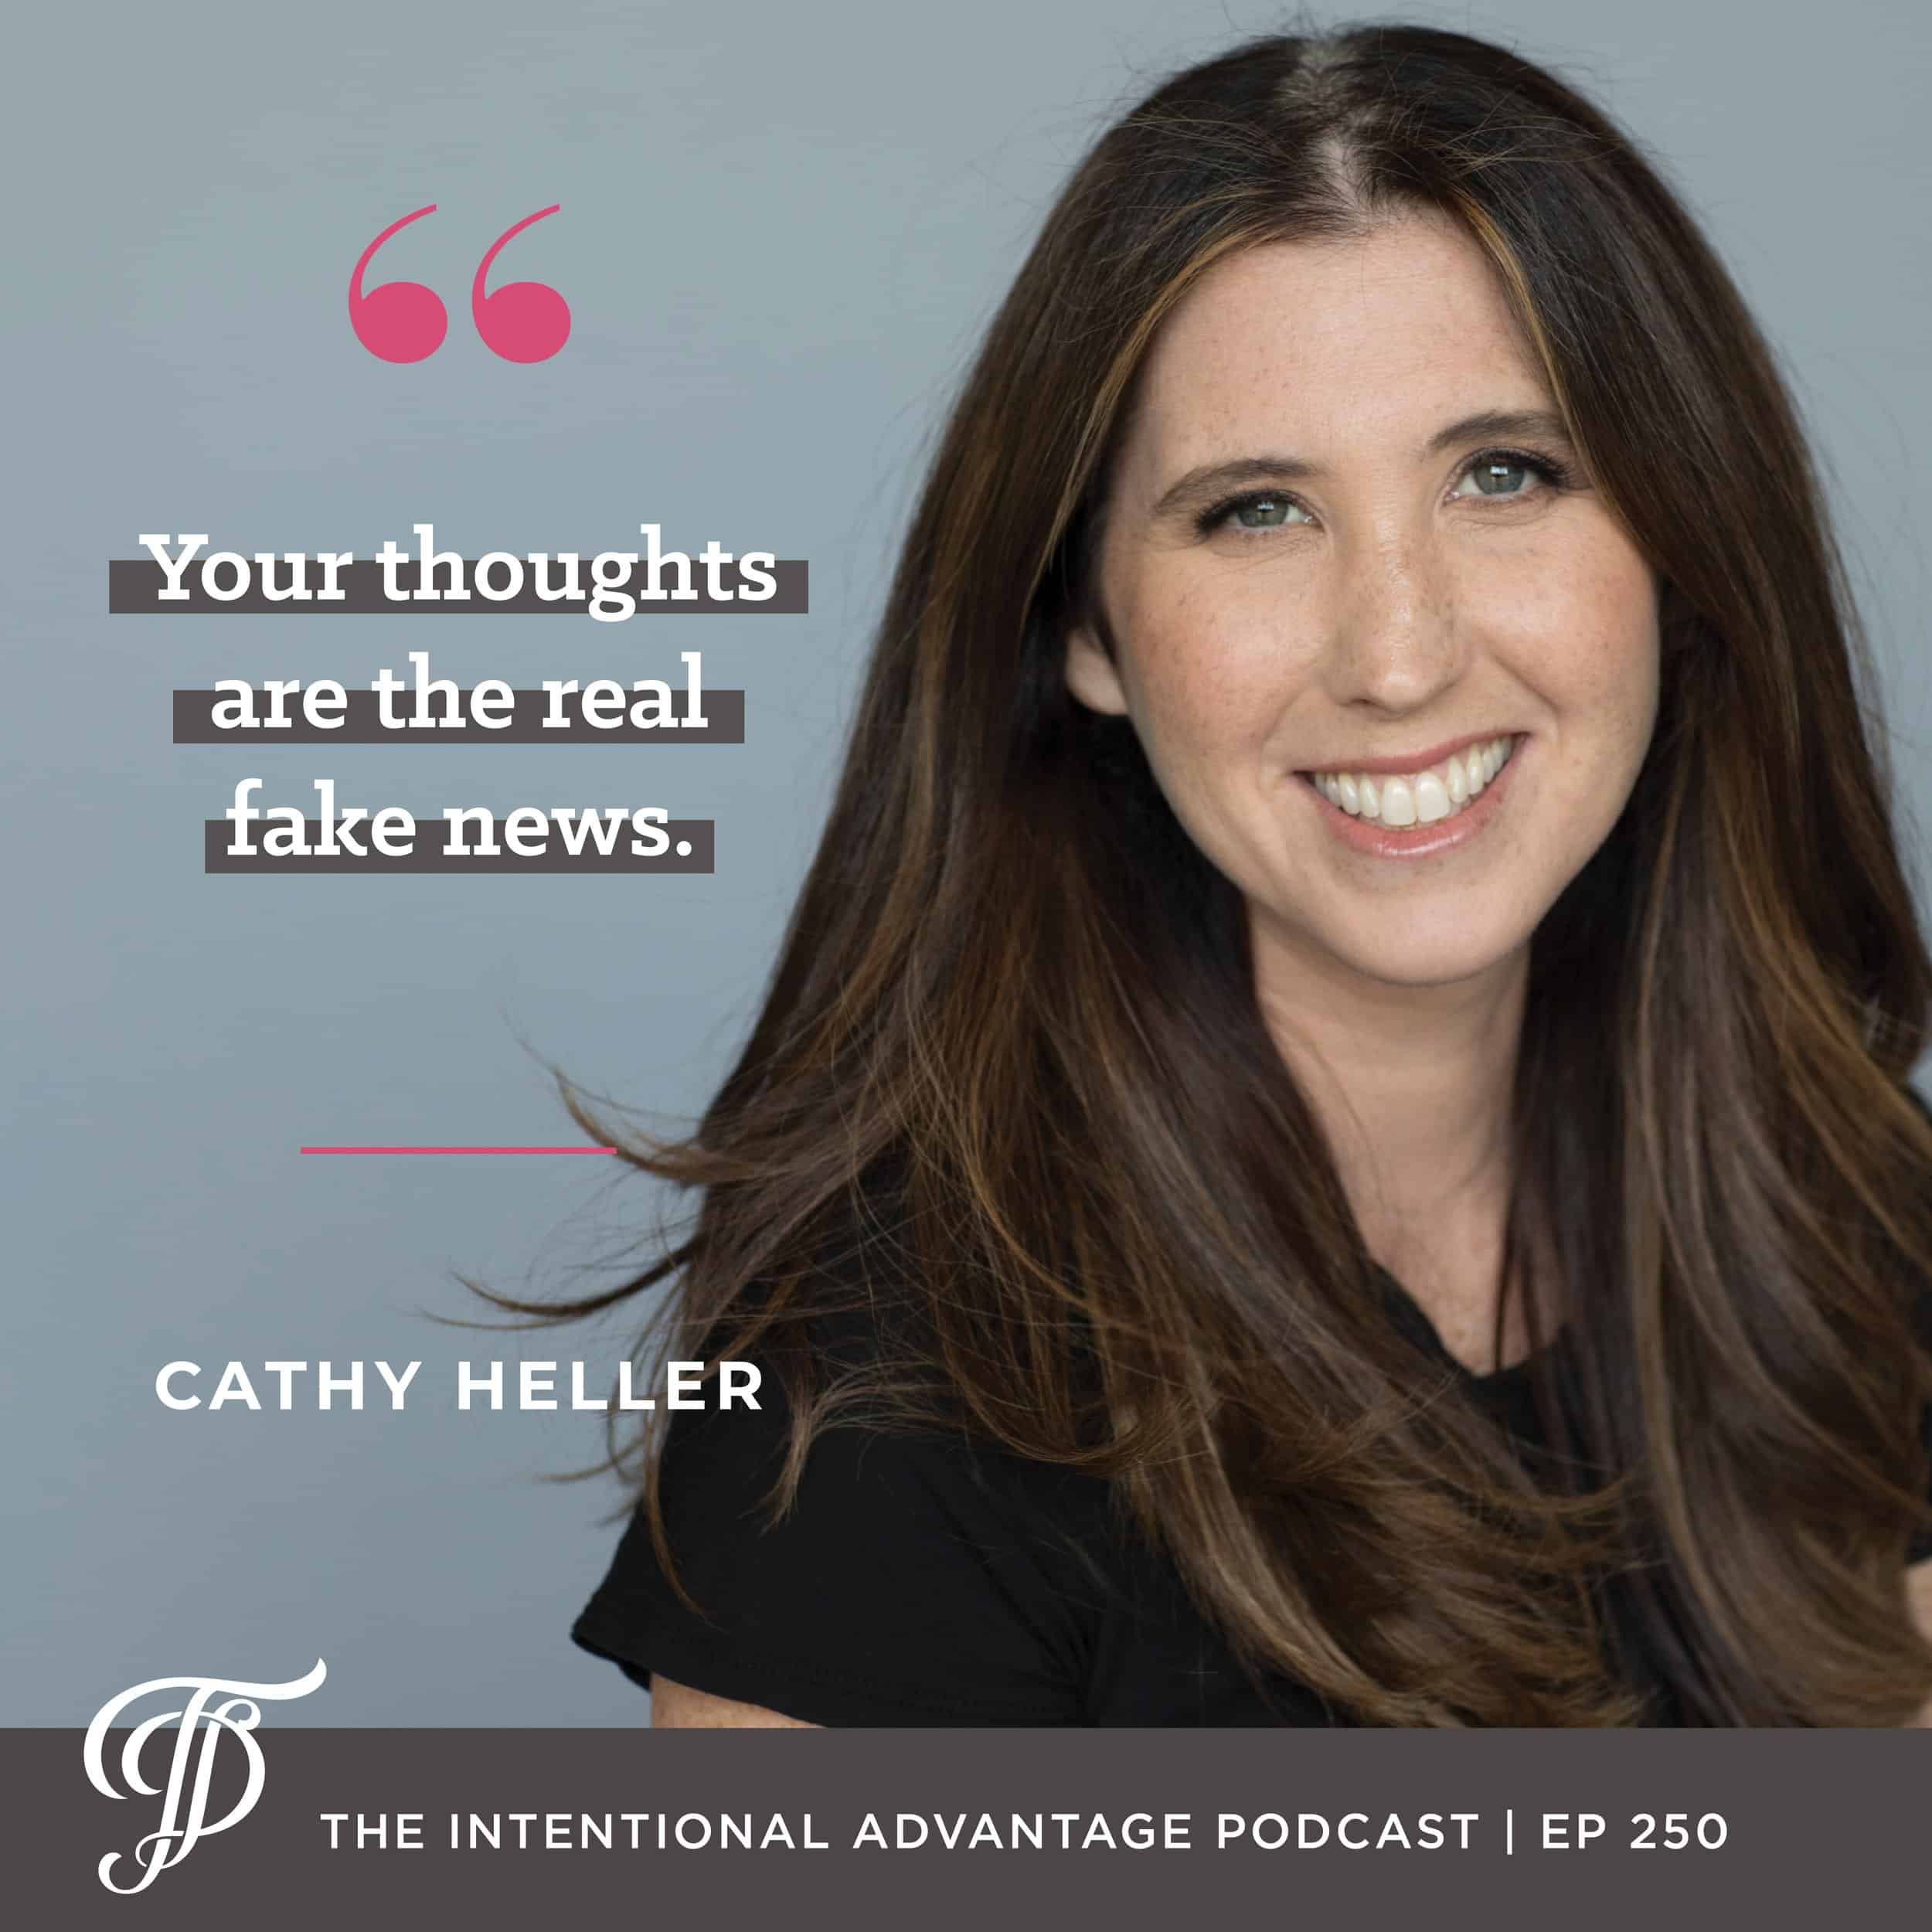 Cathy Heller quote from her podcast interview on The Intentional Advantage